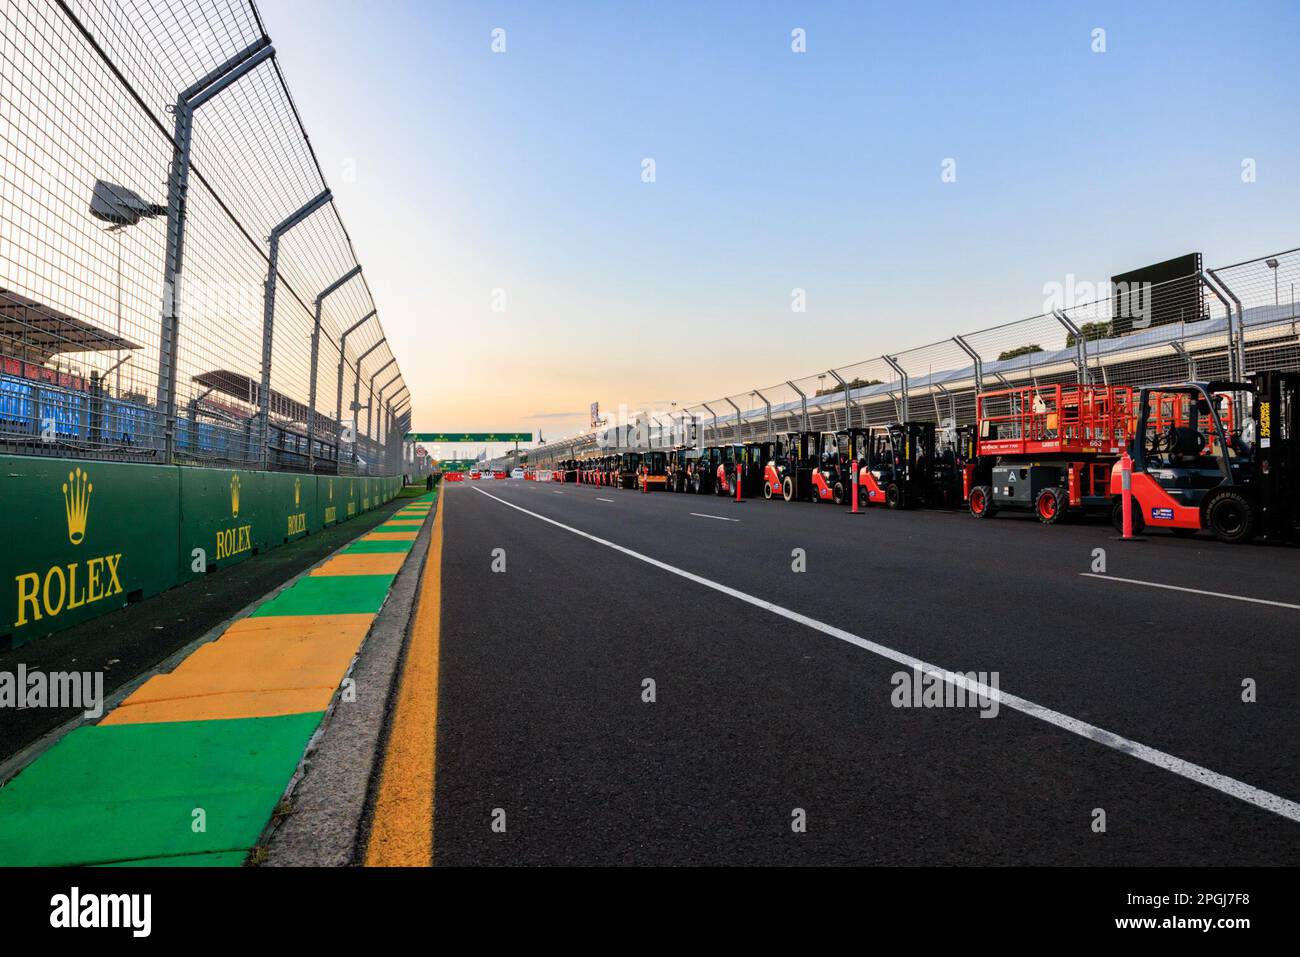 Albert Park, Melbourne. Thursday, Mar. 23, 2023.Forklifts line the final straight at the Albert Park Formula 1 Grand Prix street circuit during track preparations ahead of the event next week. credit: corleve/Alamy Live News Stock Photo